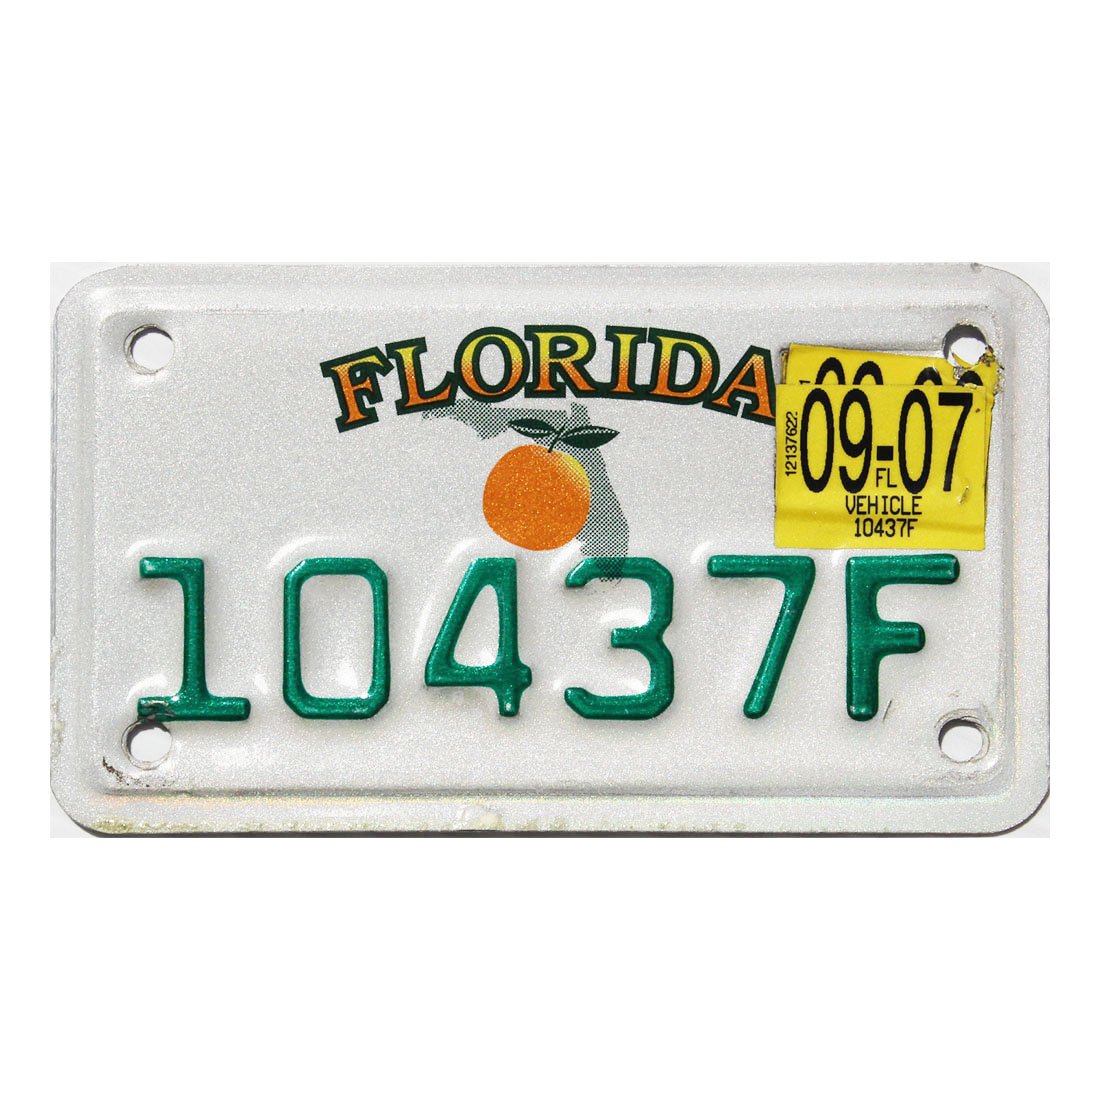 Motorcycle License in Florida